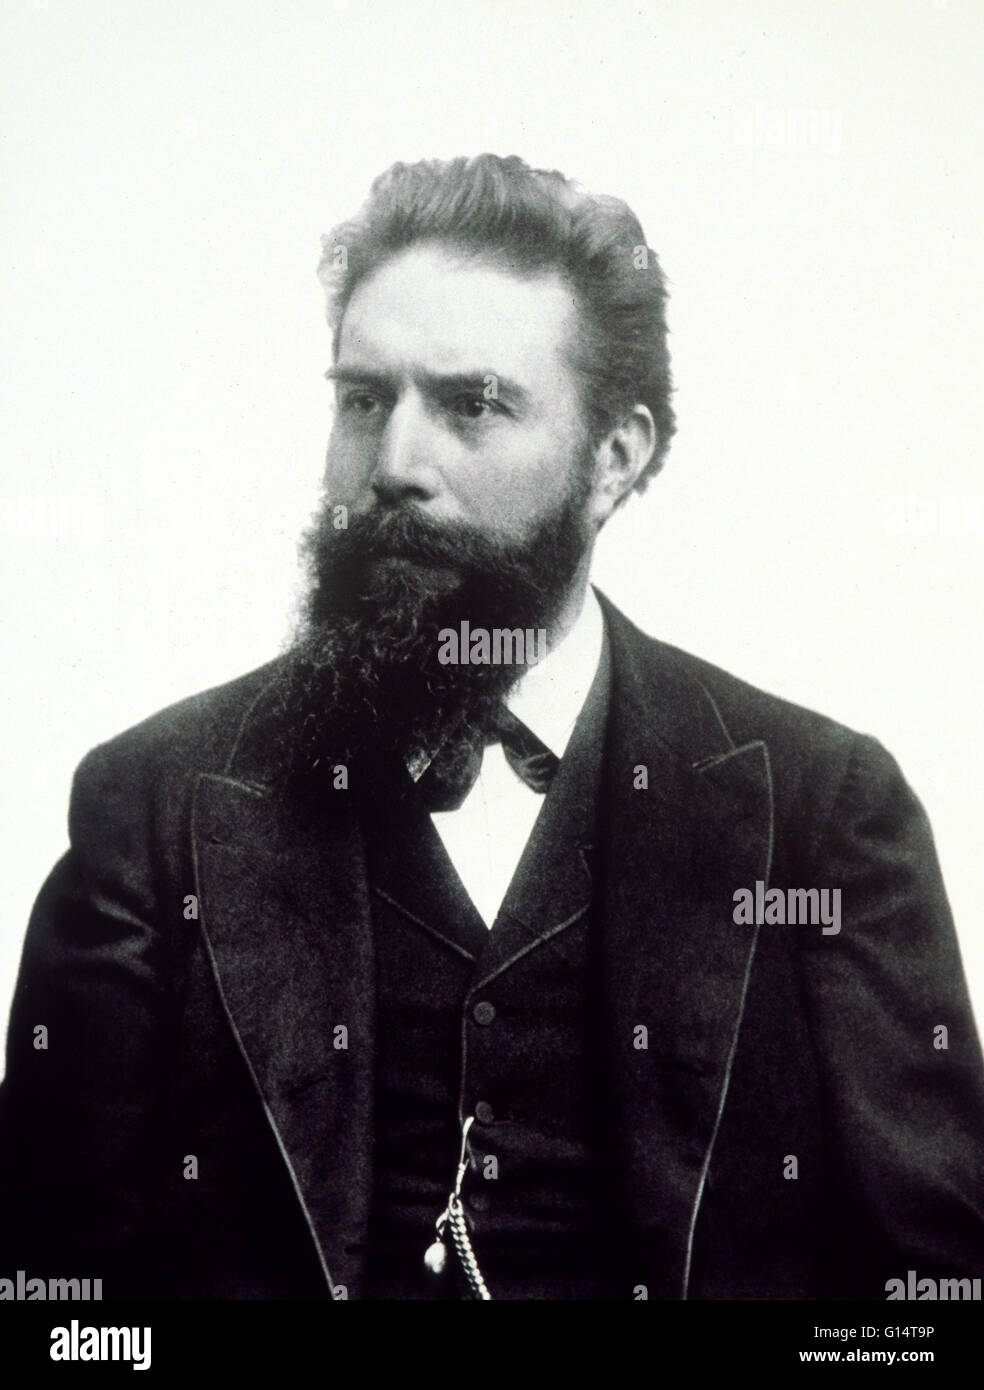 Wilhelm Konrad Roentgen (1845-1923), German experimental physicist and discoverer of X-rays. While using a discharge tube (in which an electric discharge is passed through a gas at low pressure) in a darkened room, Roentgen noticed that a card coated with Stock Photo